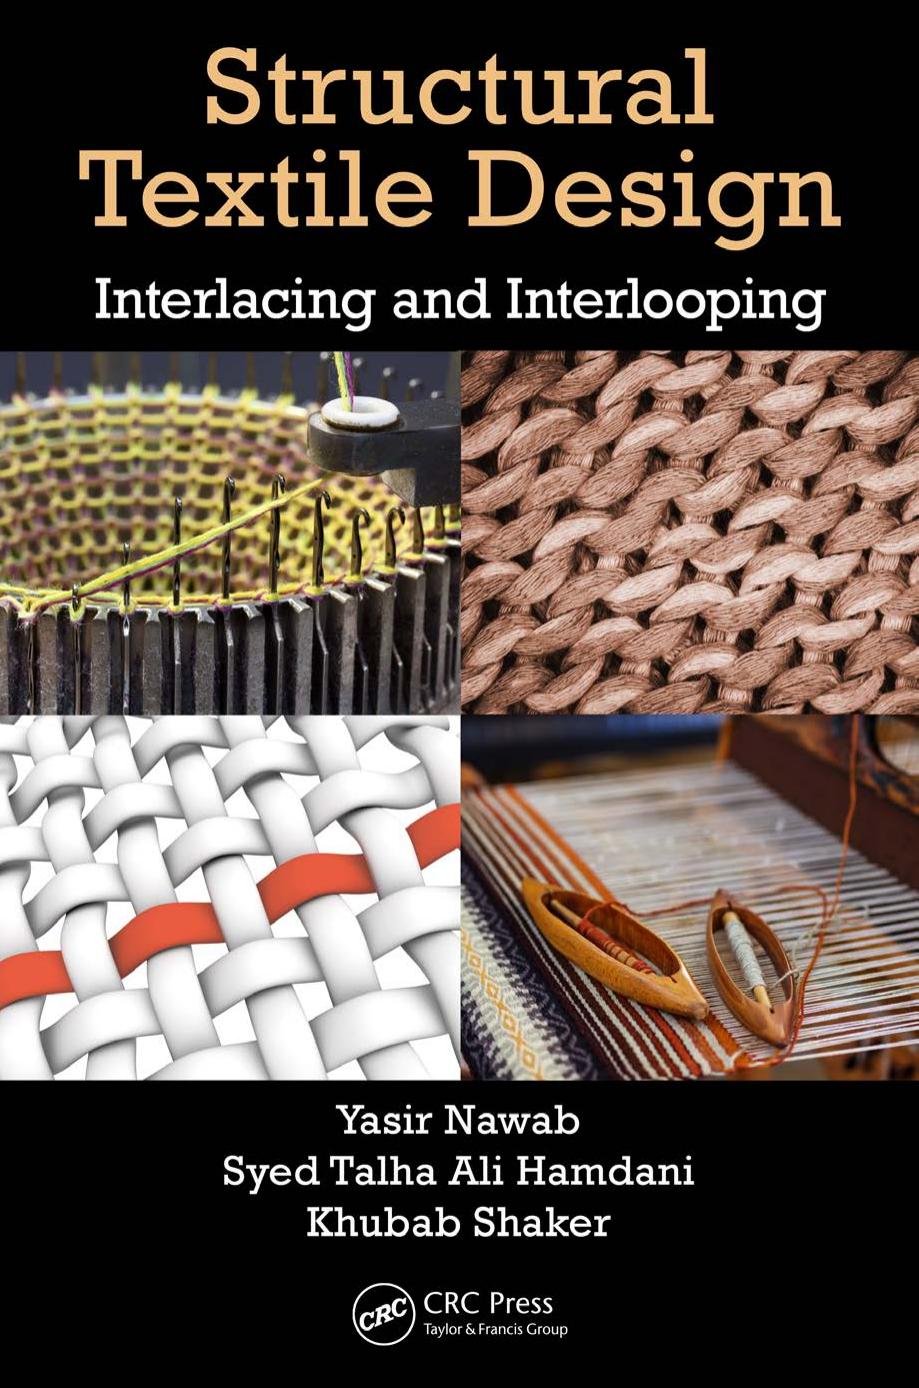 Structural Textile Design: Interlacing and Interlooping